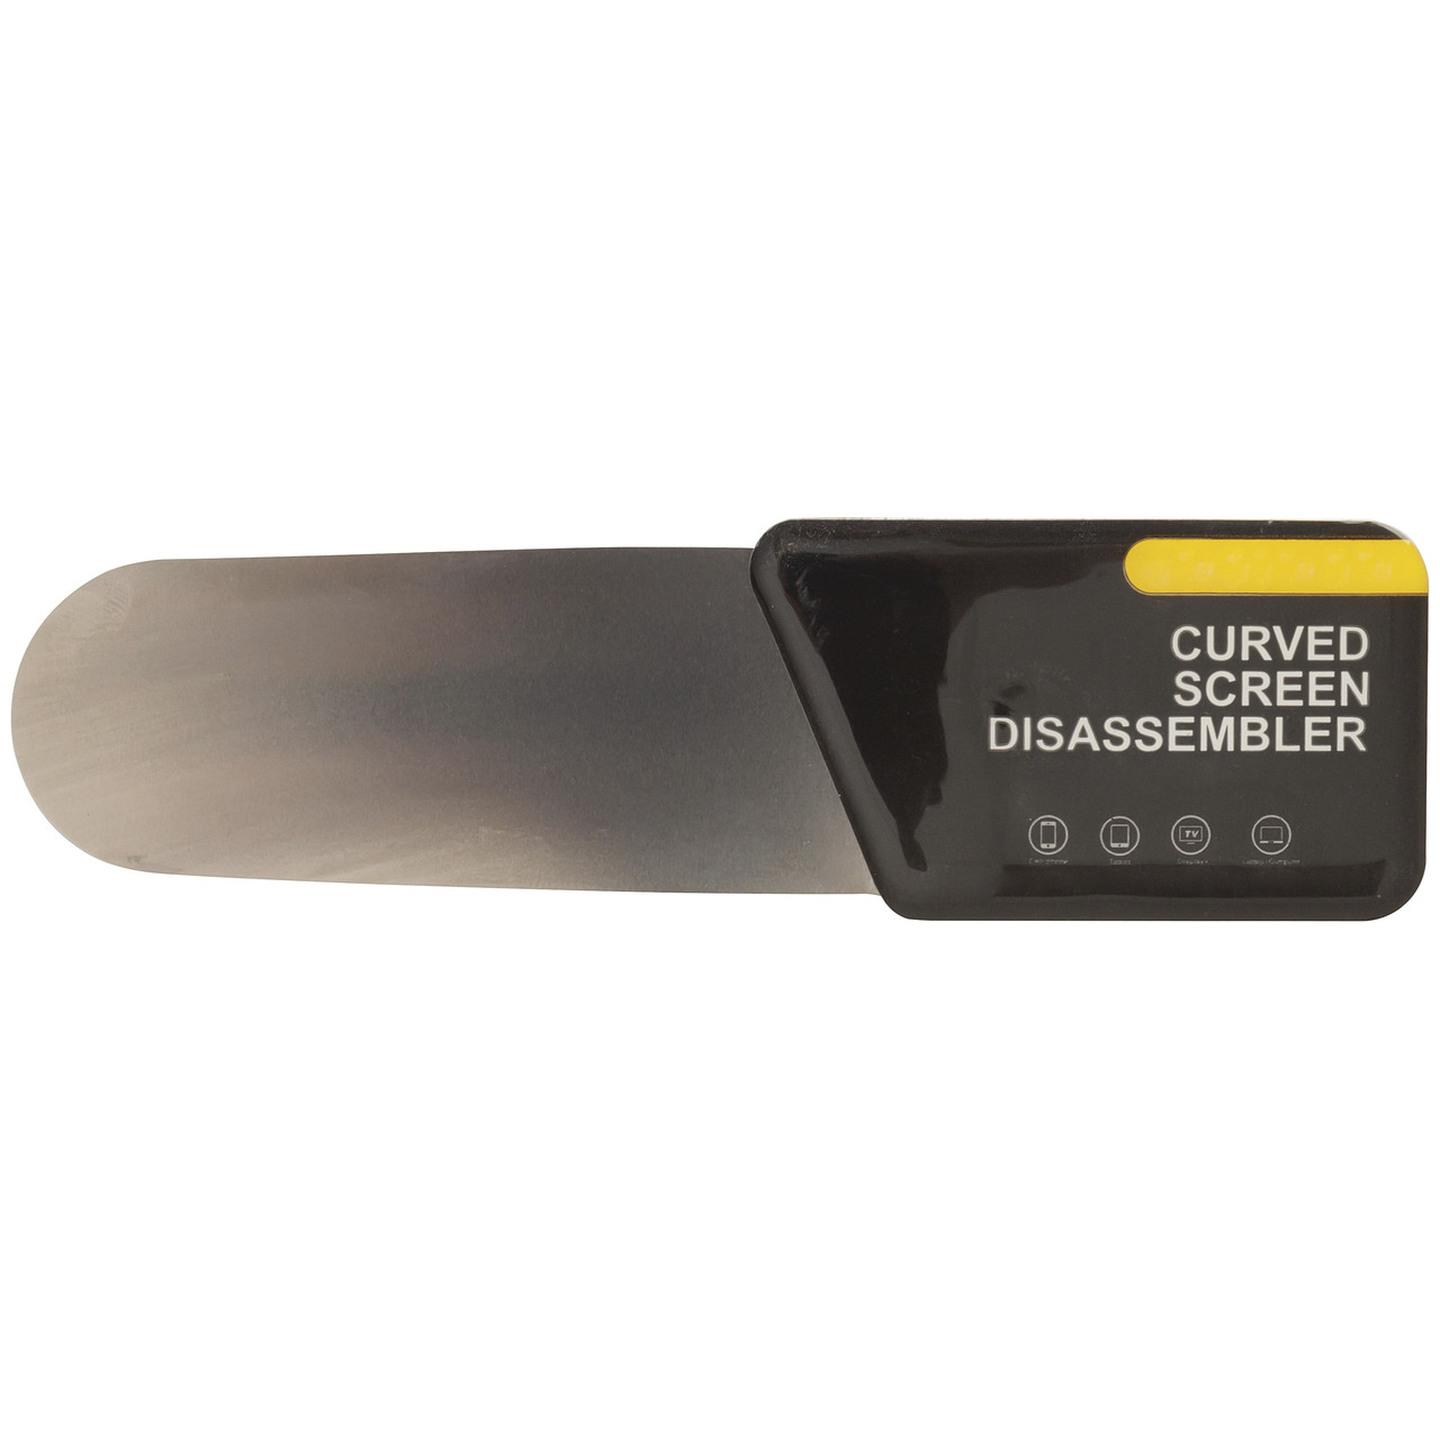 Opener Tool for Curved Screens Devices